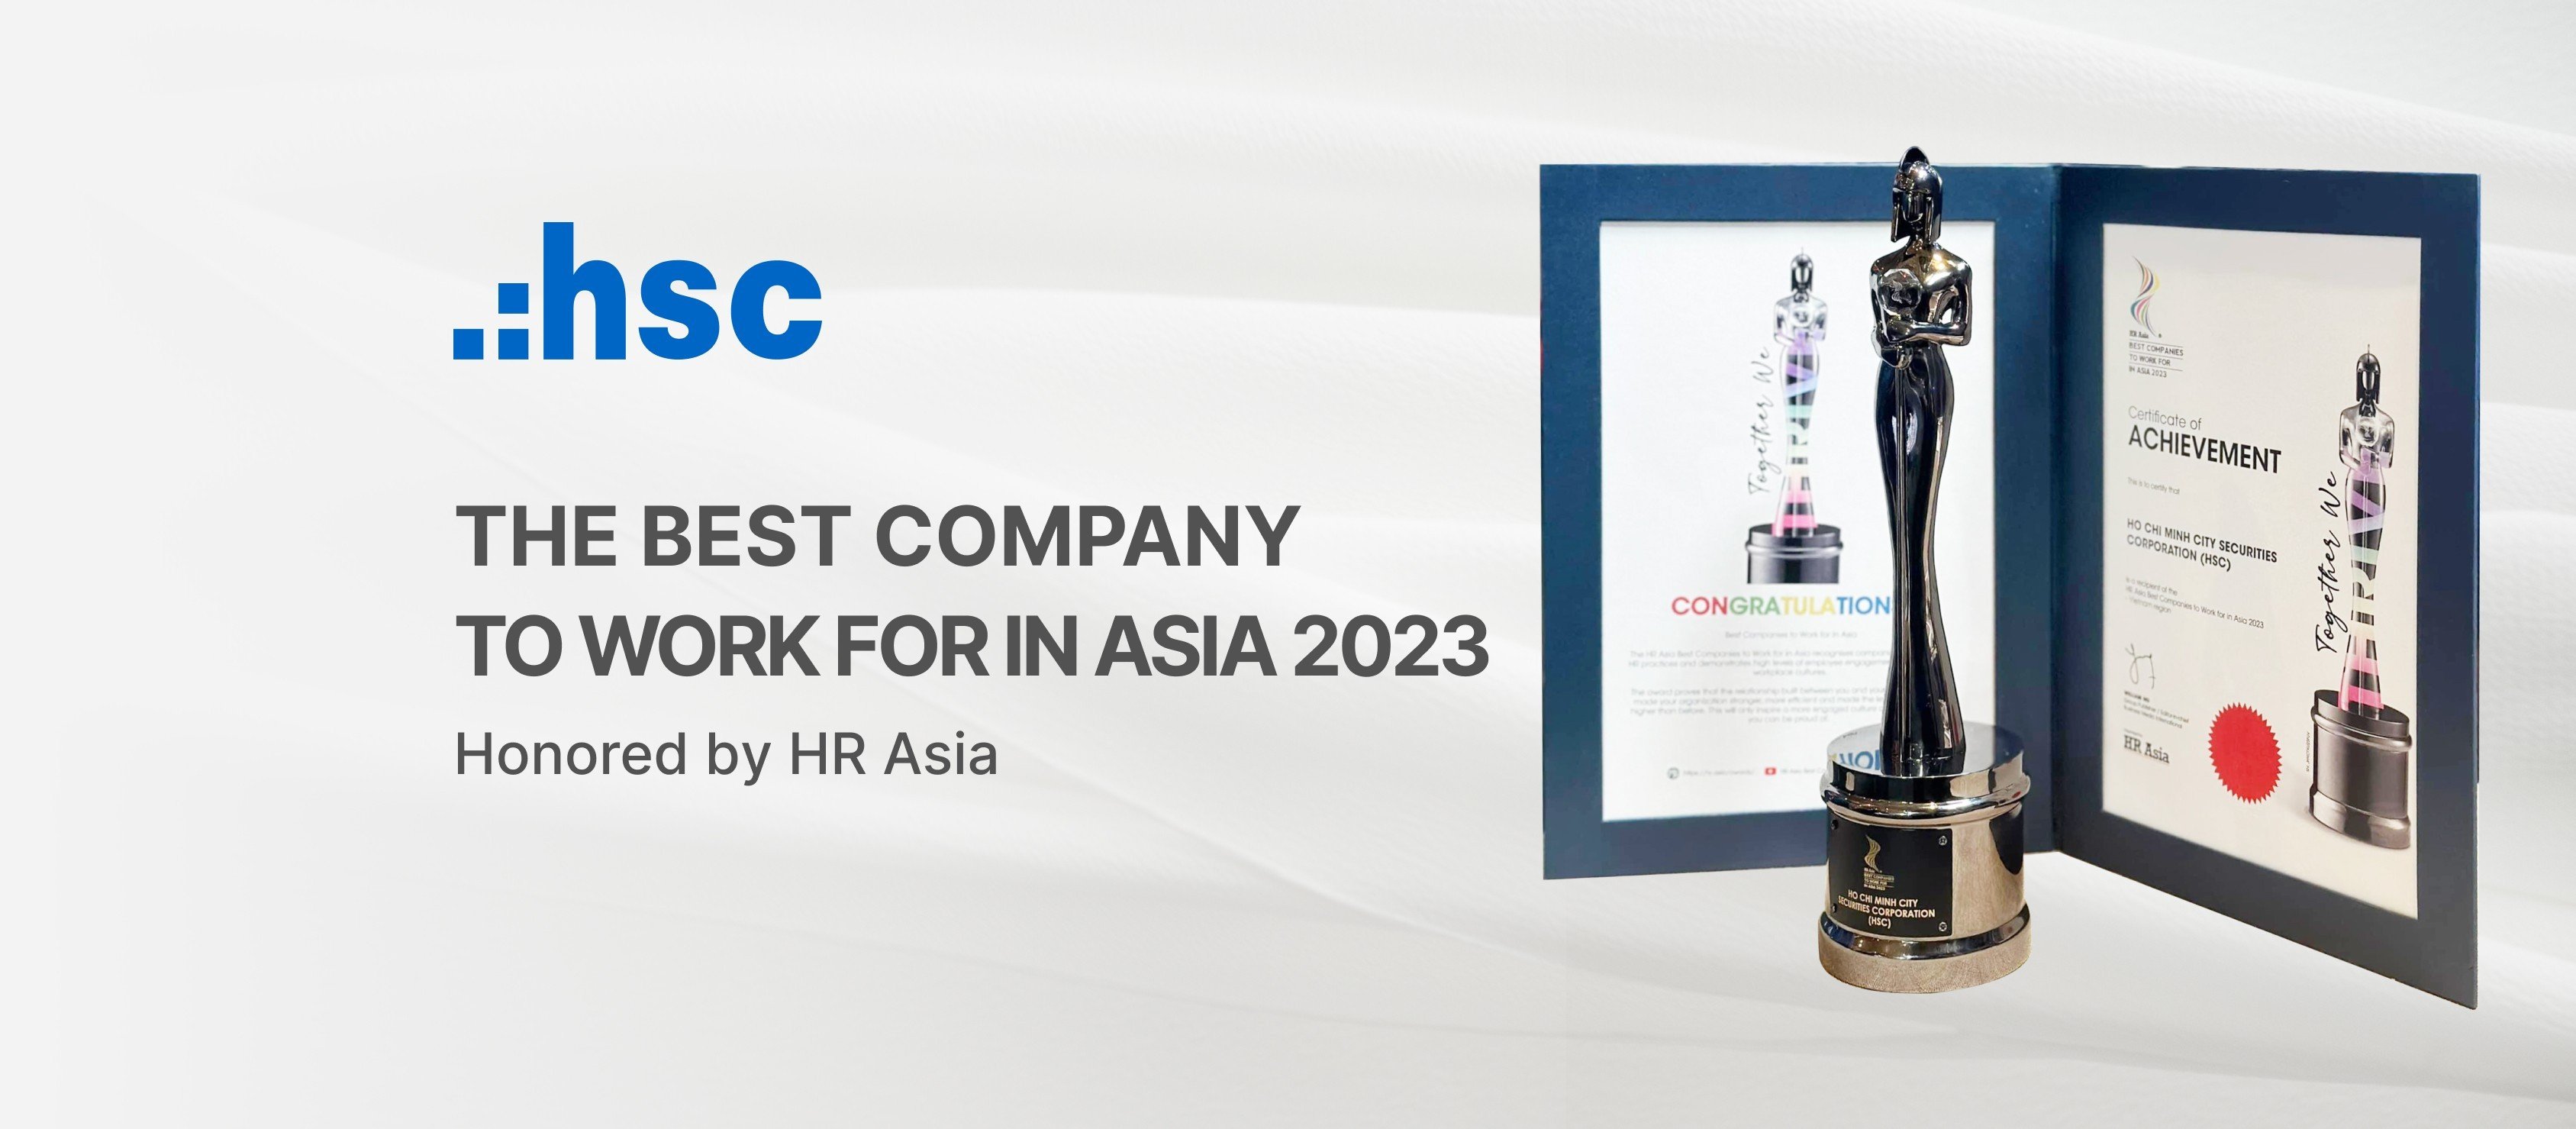 HSC - "Best Companies to Work for in Asia 2023" - Honored by HR ASIA